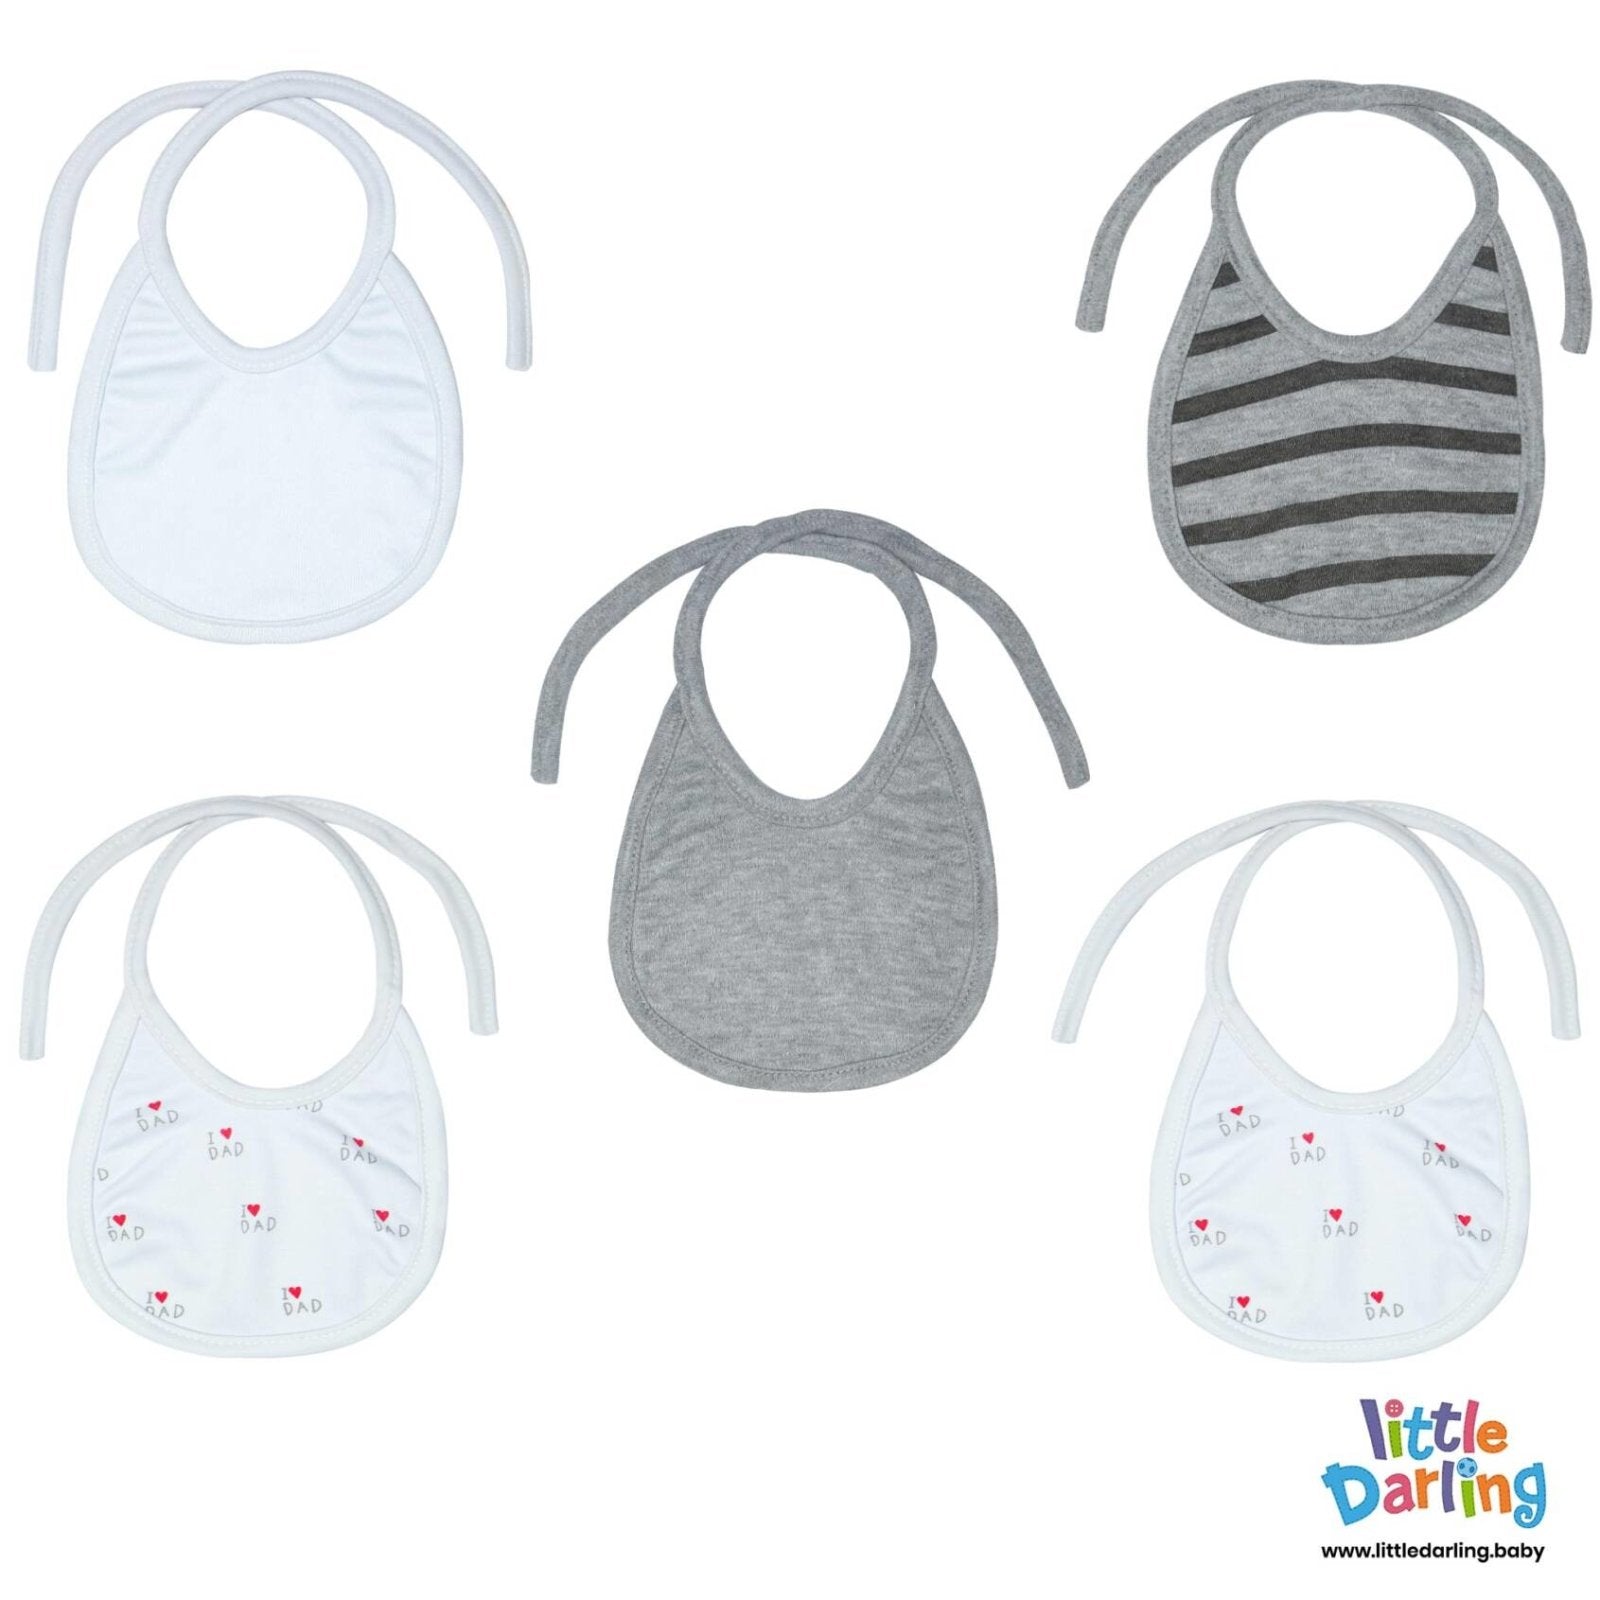 Baby Bibs Pk of 5 I Love Dad by Little Darling